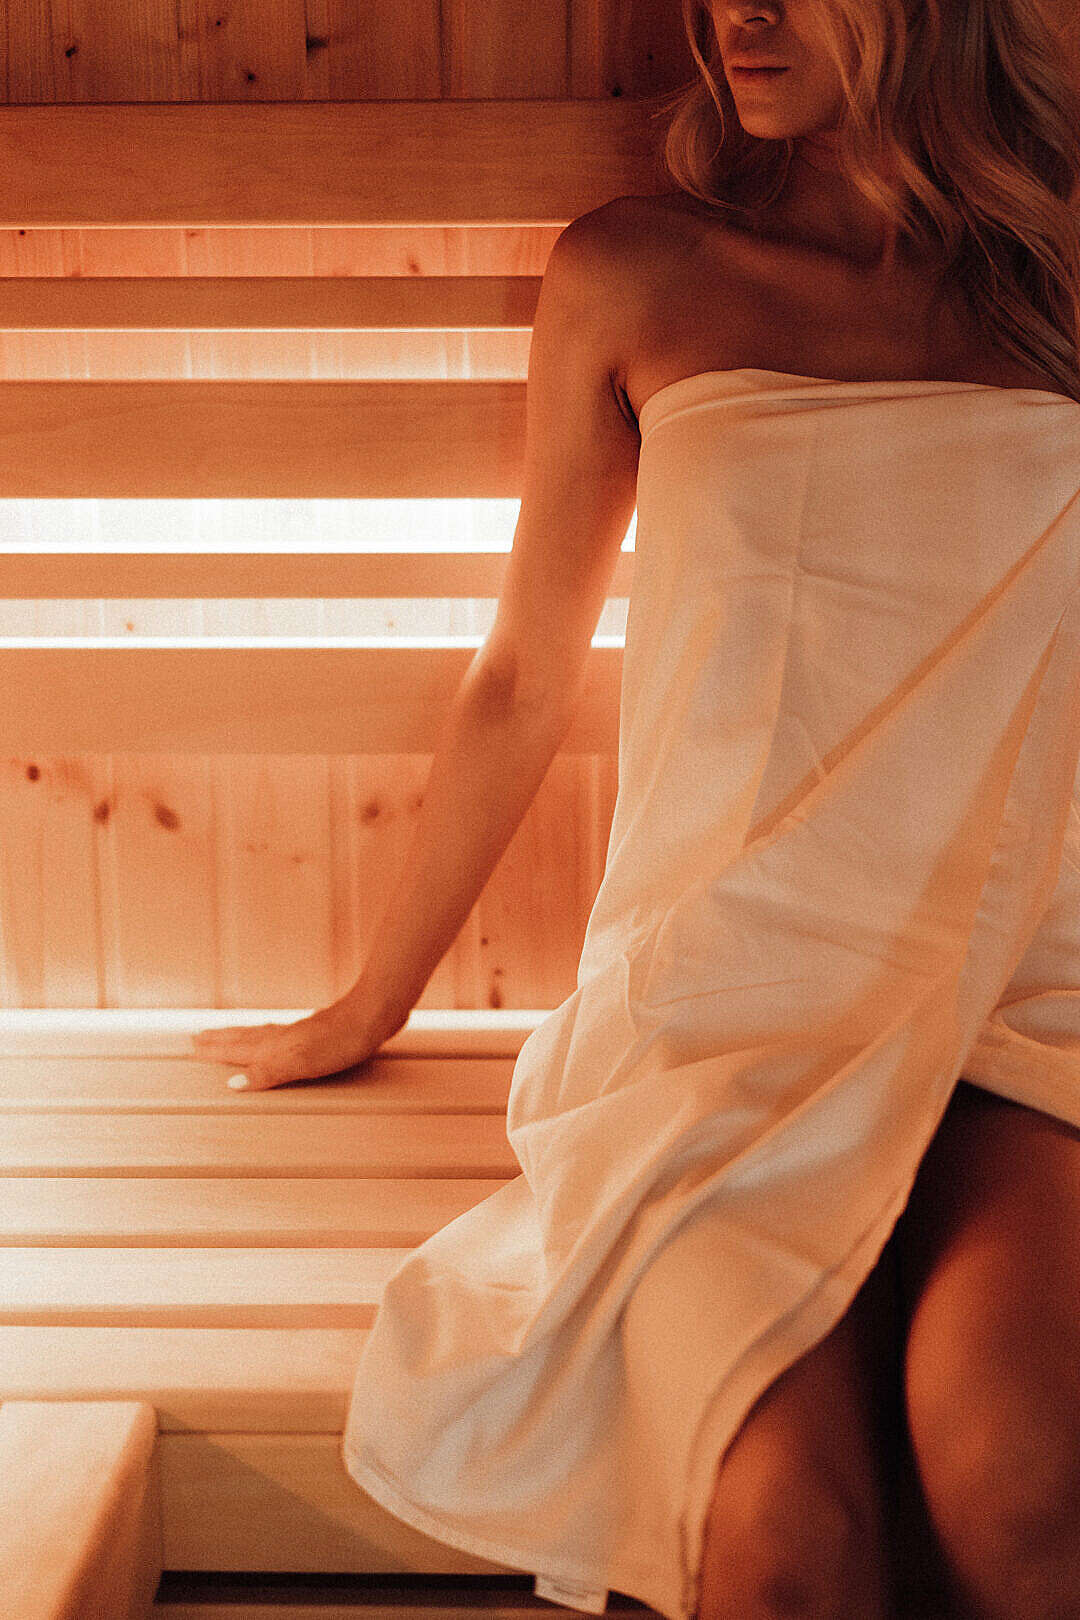 Download Young Woman Sitting in a Finnish Sauna FREE Stock Photo